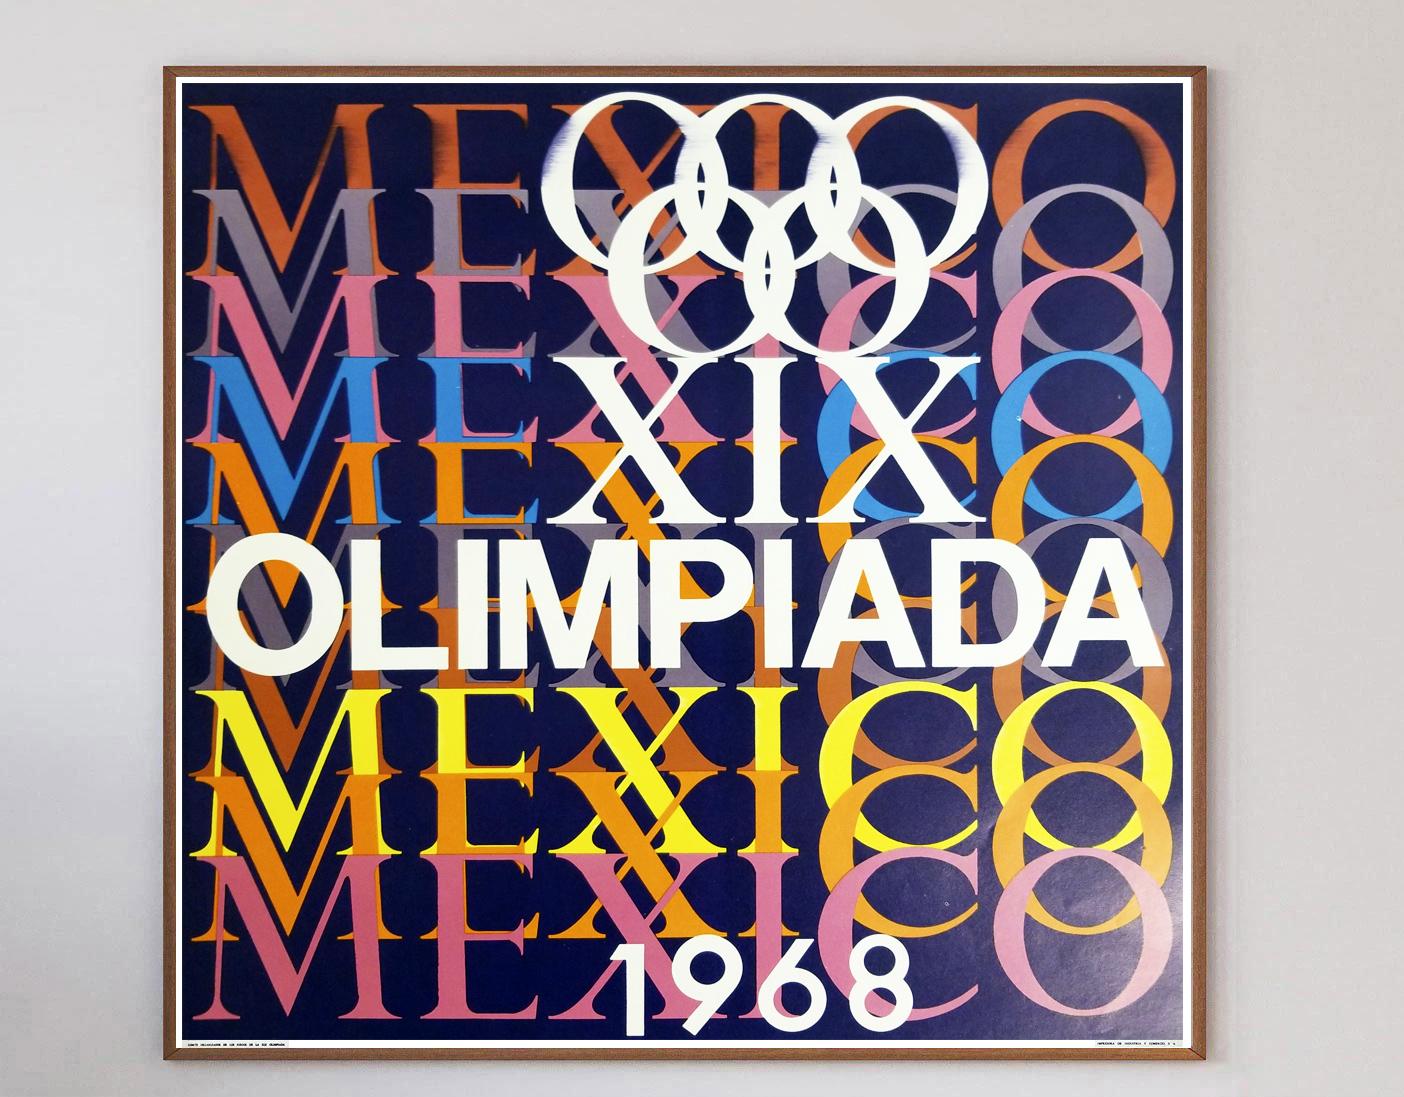 The 1968 Summer Olympics officially known as the Games of the XIX Olympiad, were an international multi-sport event held from 12 to 27 October 1968 in Mexico City, Mexico. These were the first Olympic Games to be staged in Latin America and the